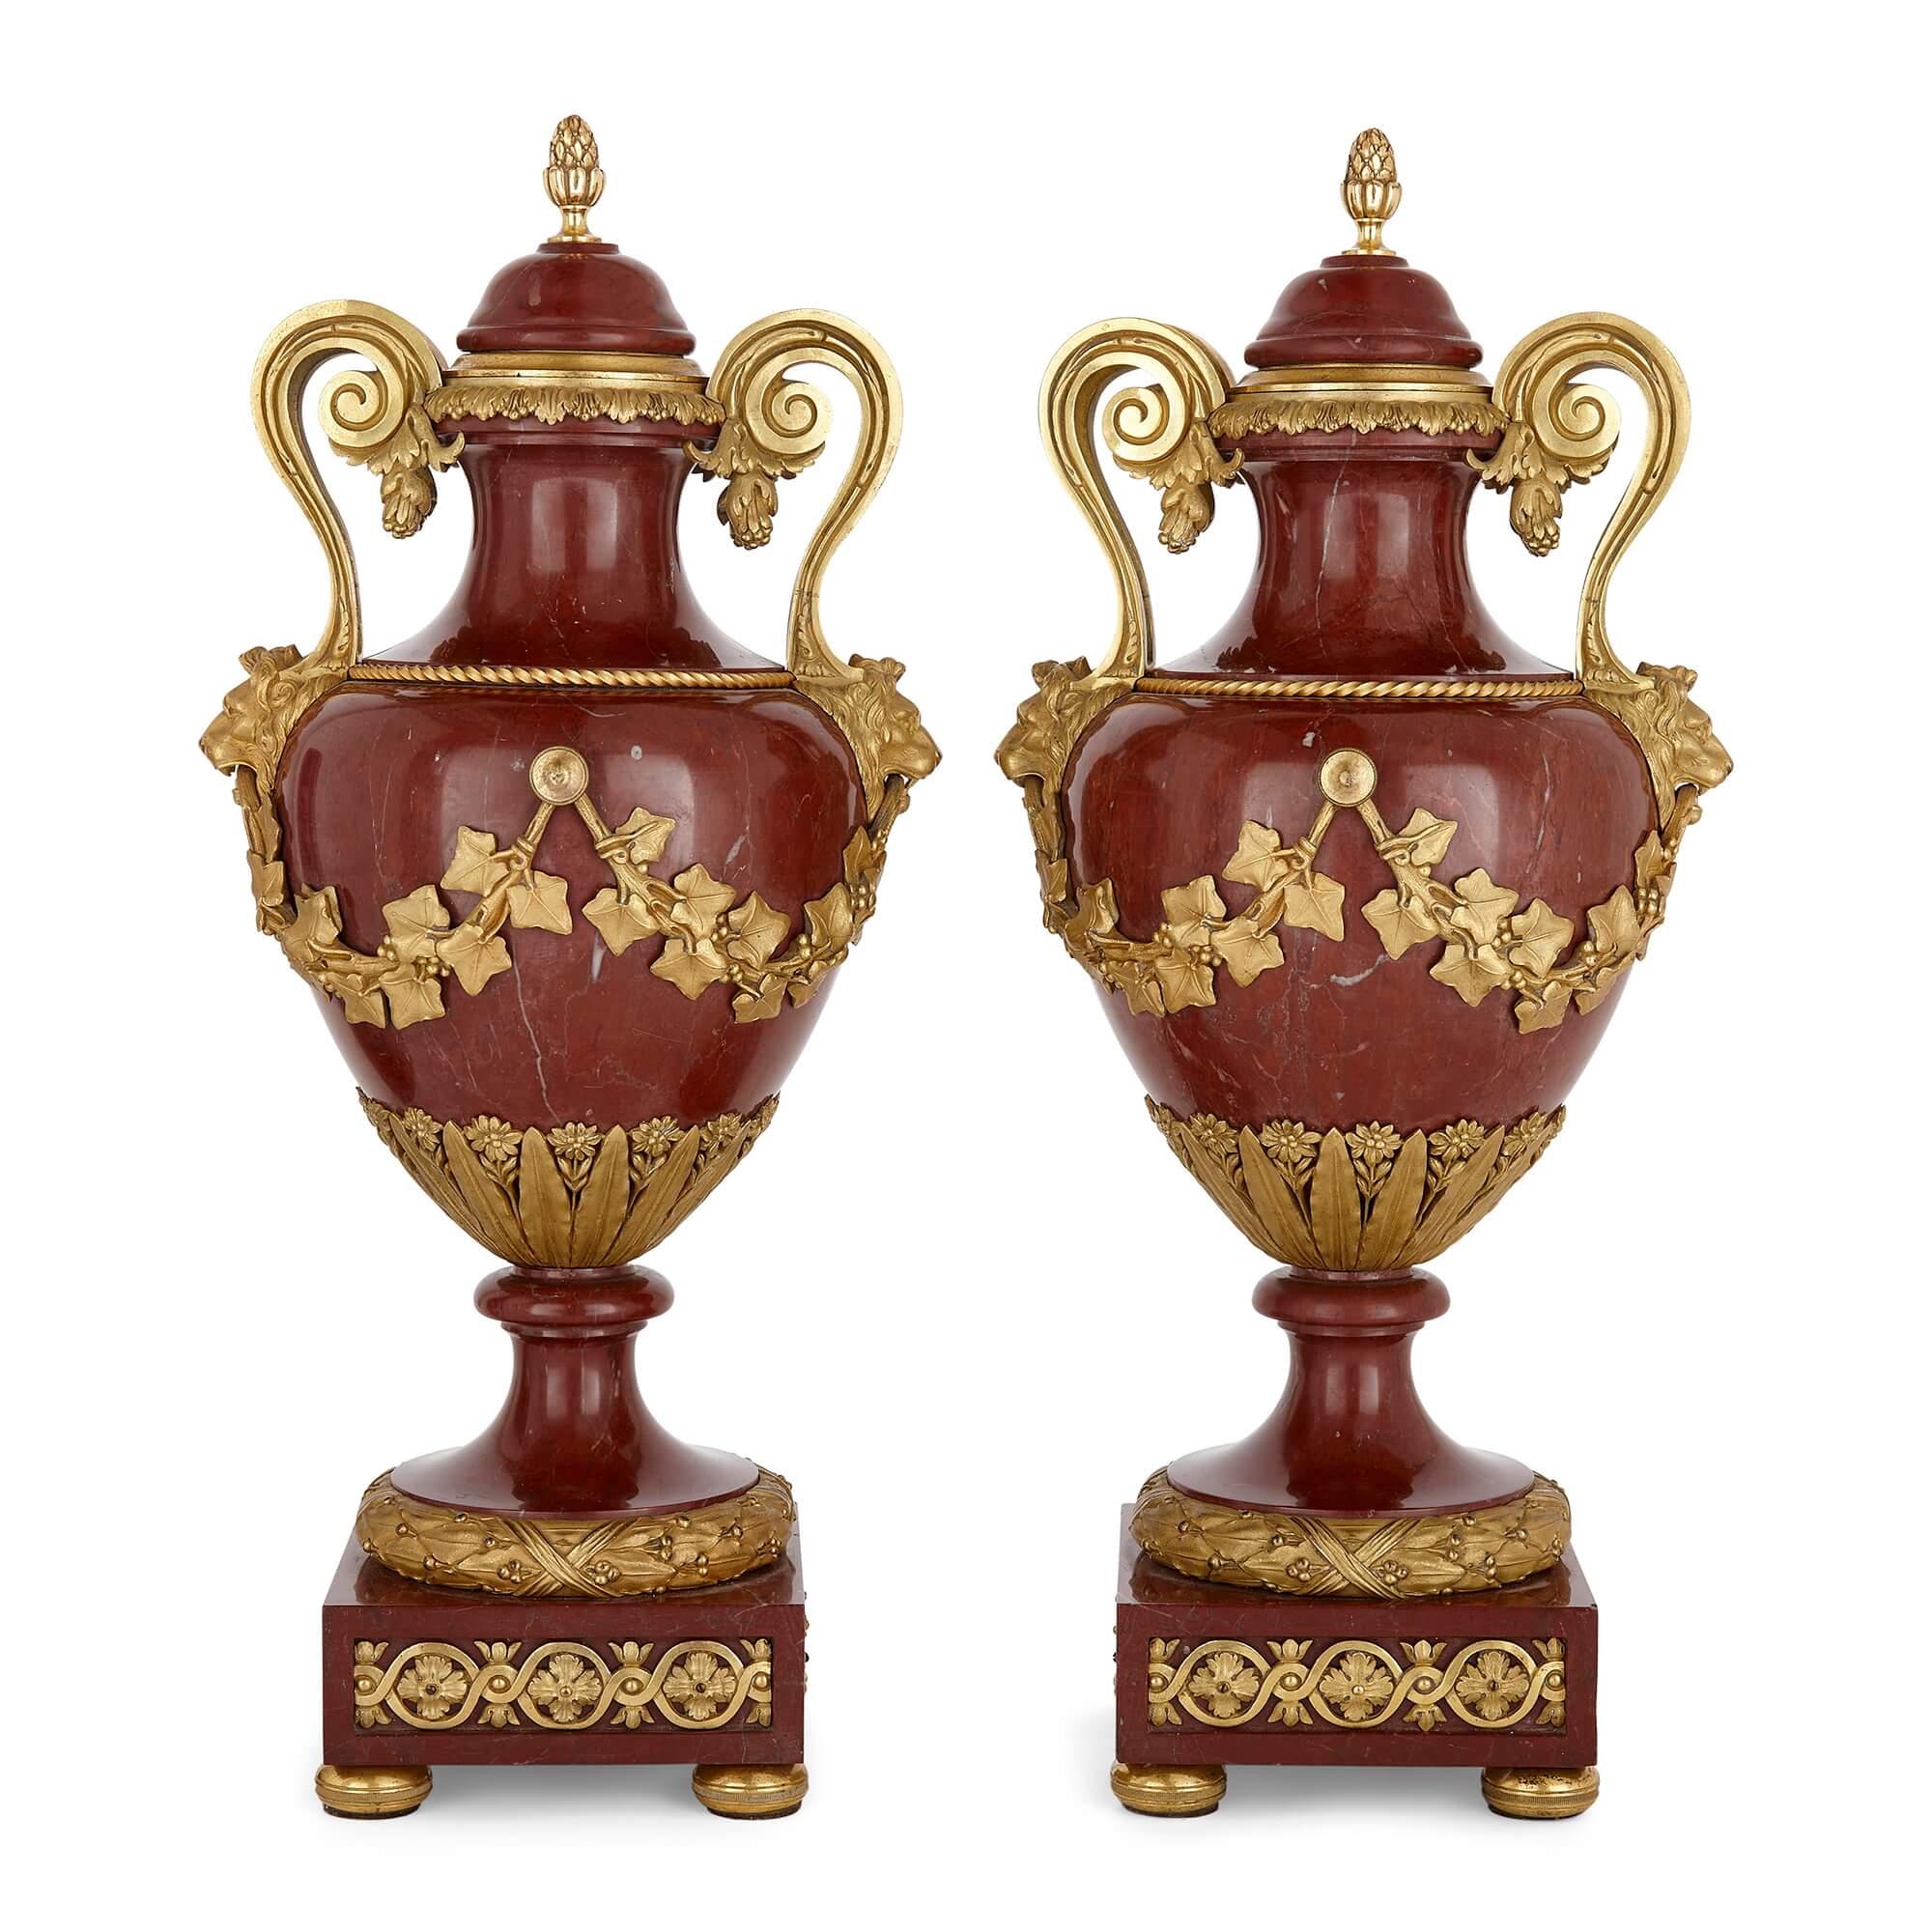 Pair of French marble and gilt bronze vases by Henry Dasson
French, 1890
Height 44cm, width 21cm, depth 18cm

In 1890, the renowned French artisan Henry Dasson (1825-1896) crafted this pair of vases which exemplify both grandeur and artistic